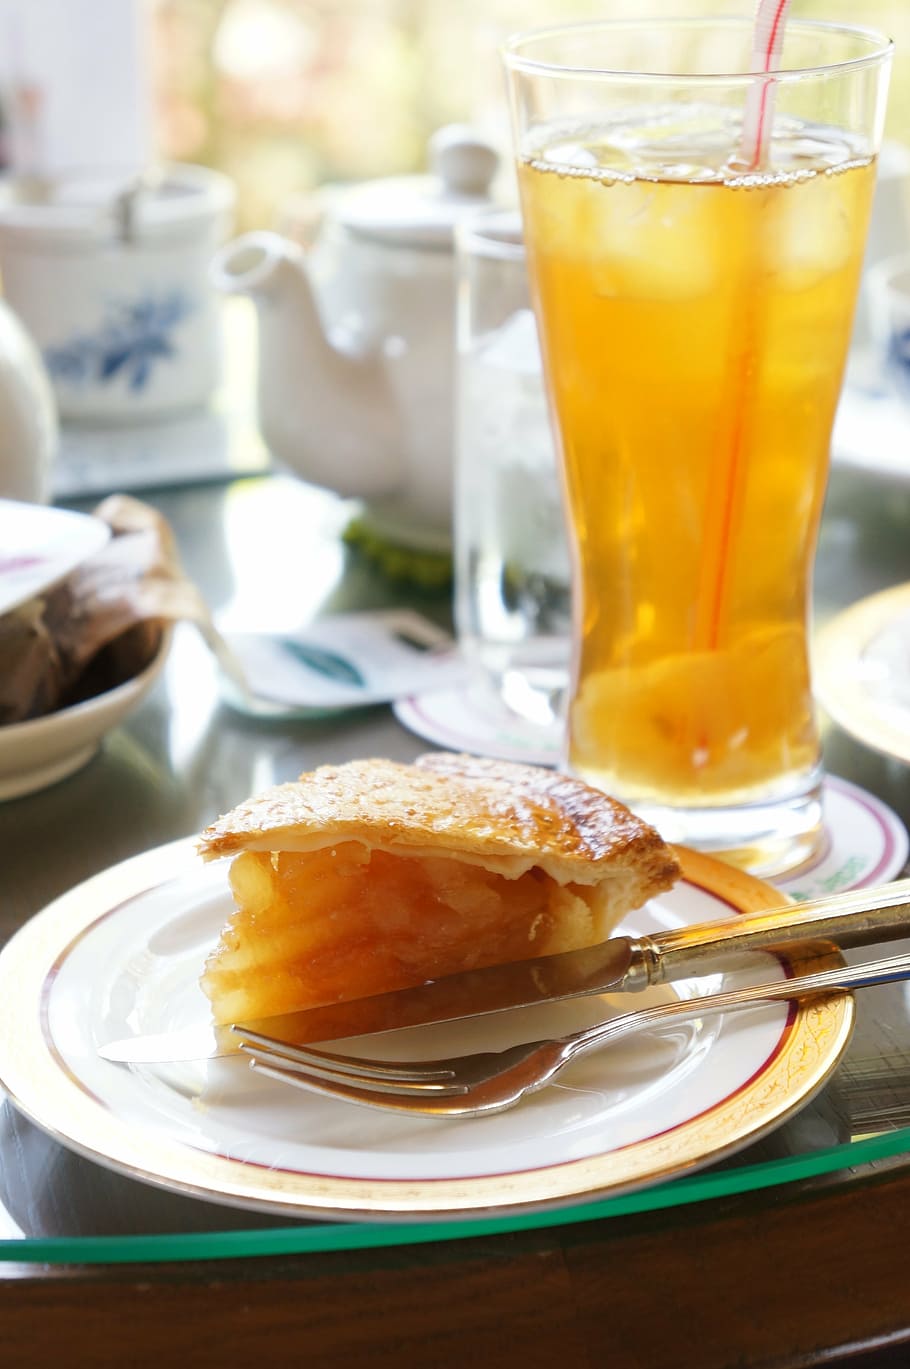 apple pie, afternoon tea, cake, cafe, food and drink, plate